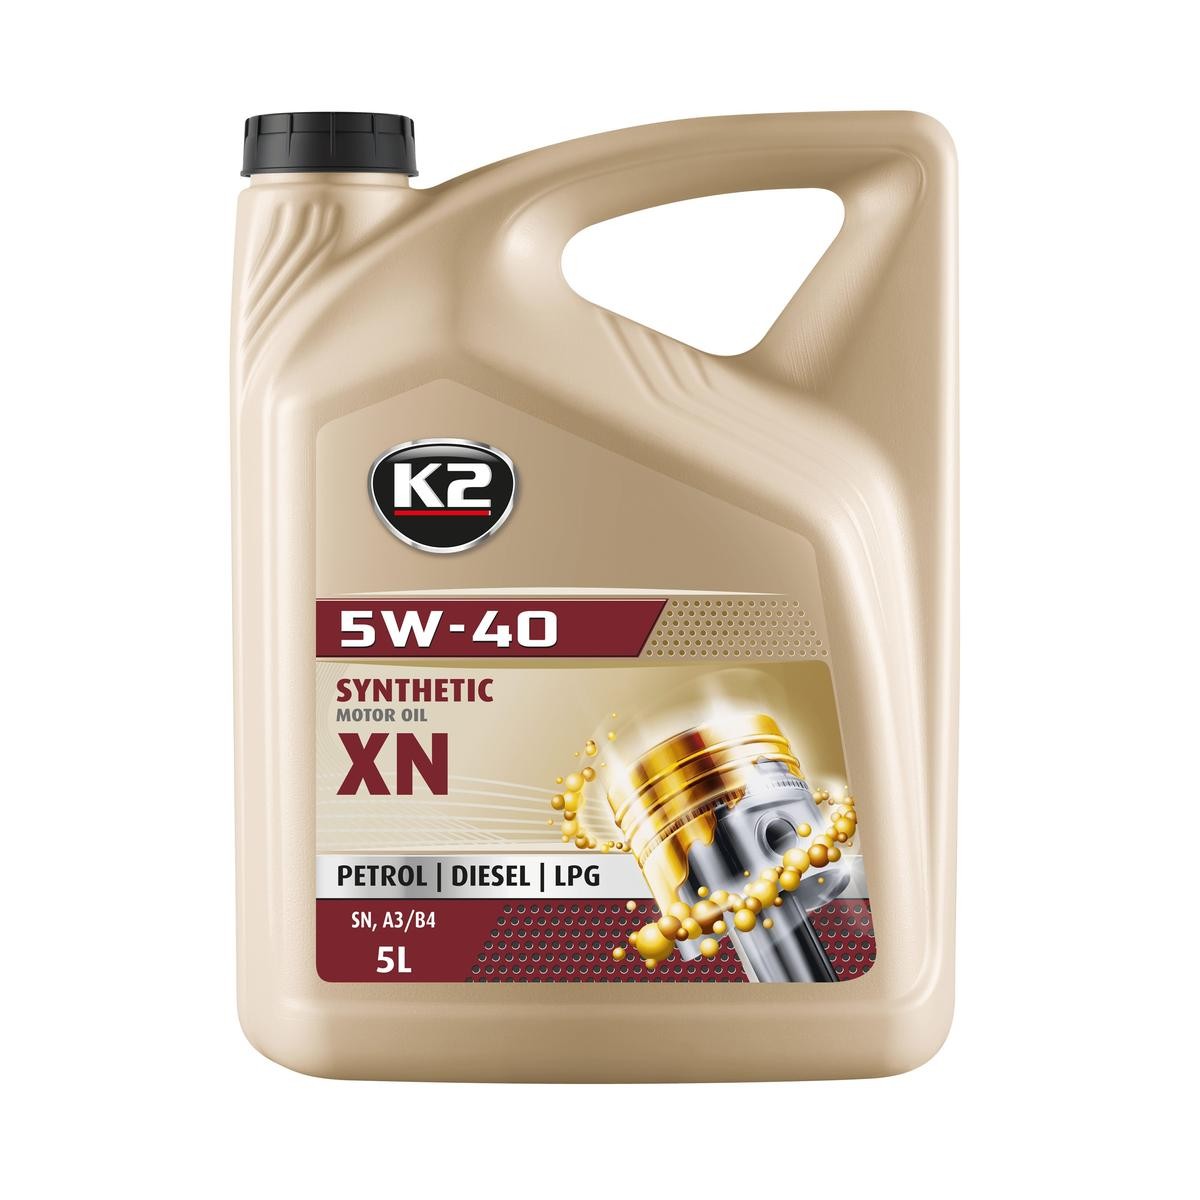 Great value for money - K2 Engine oil O1135S